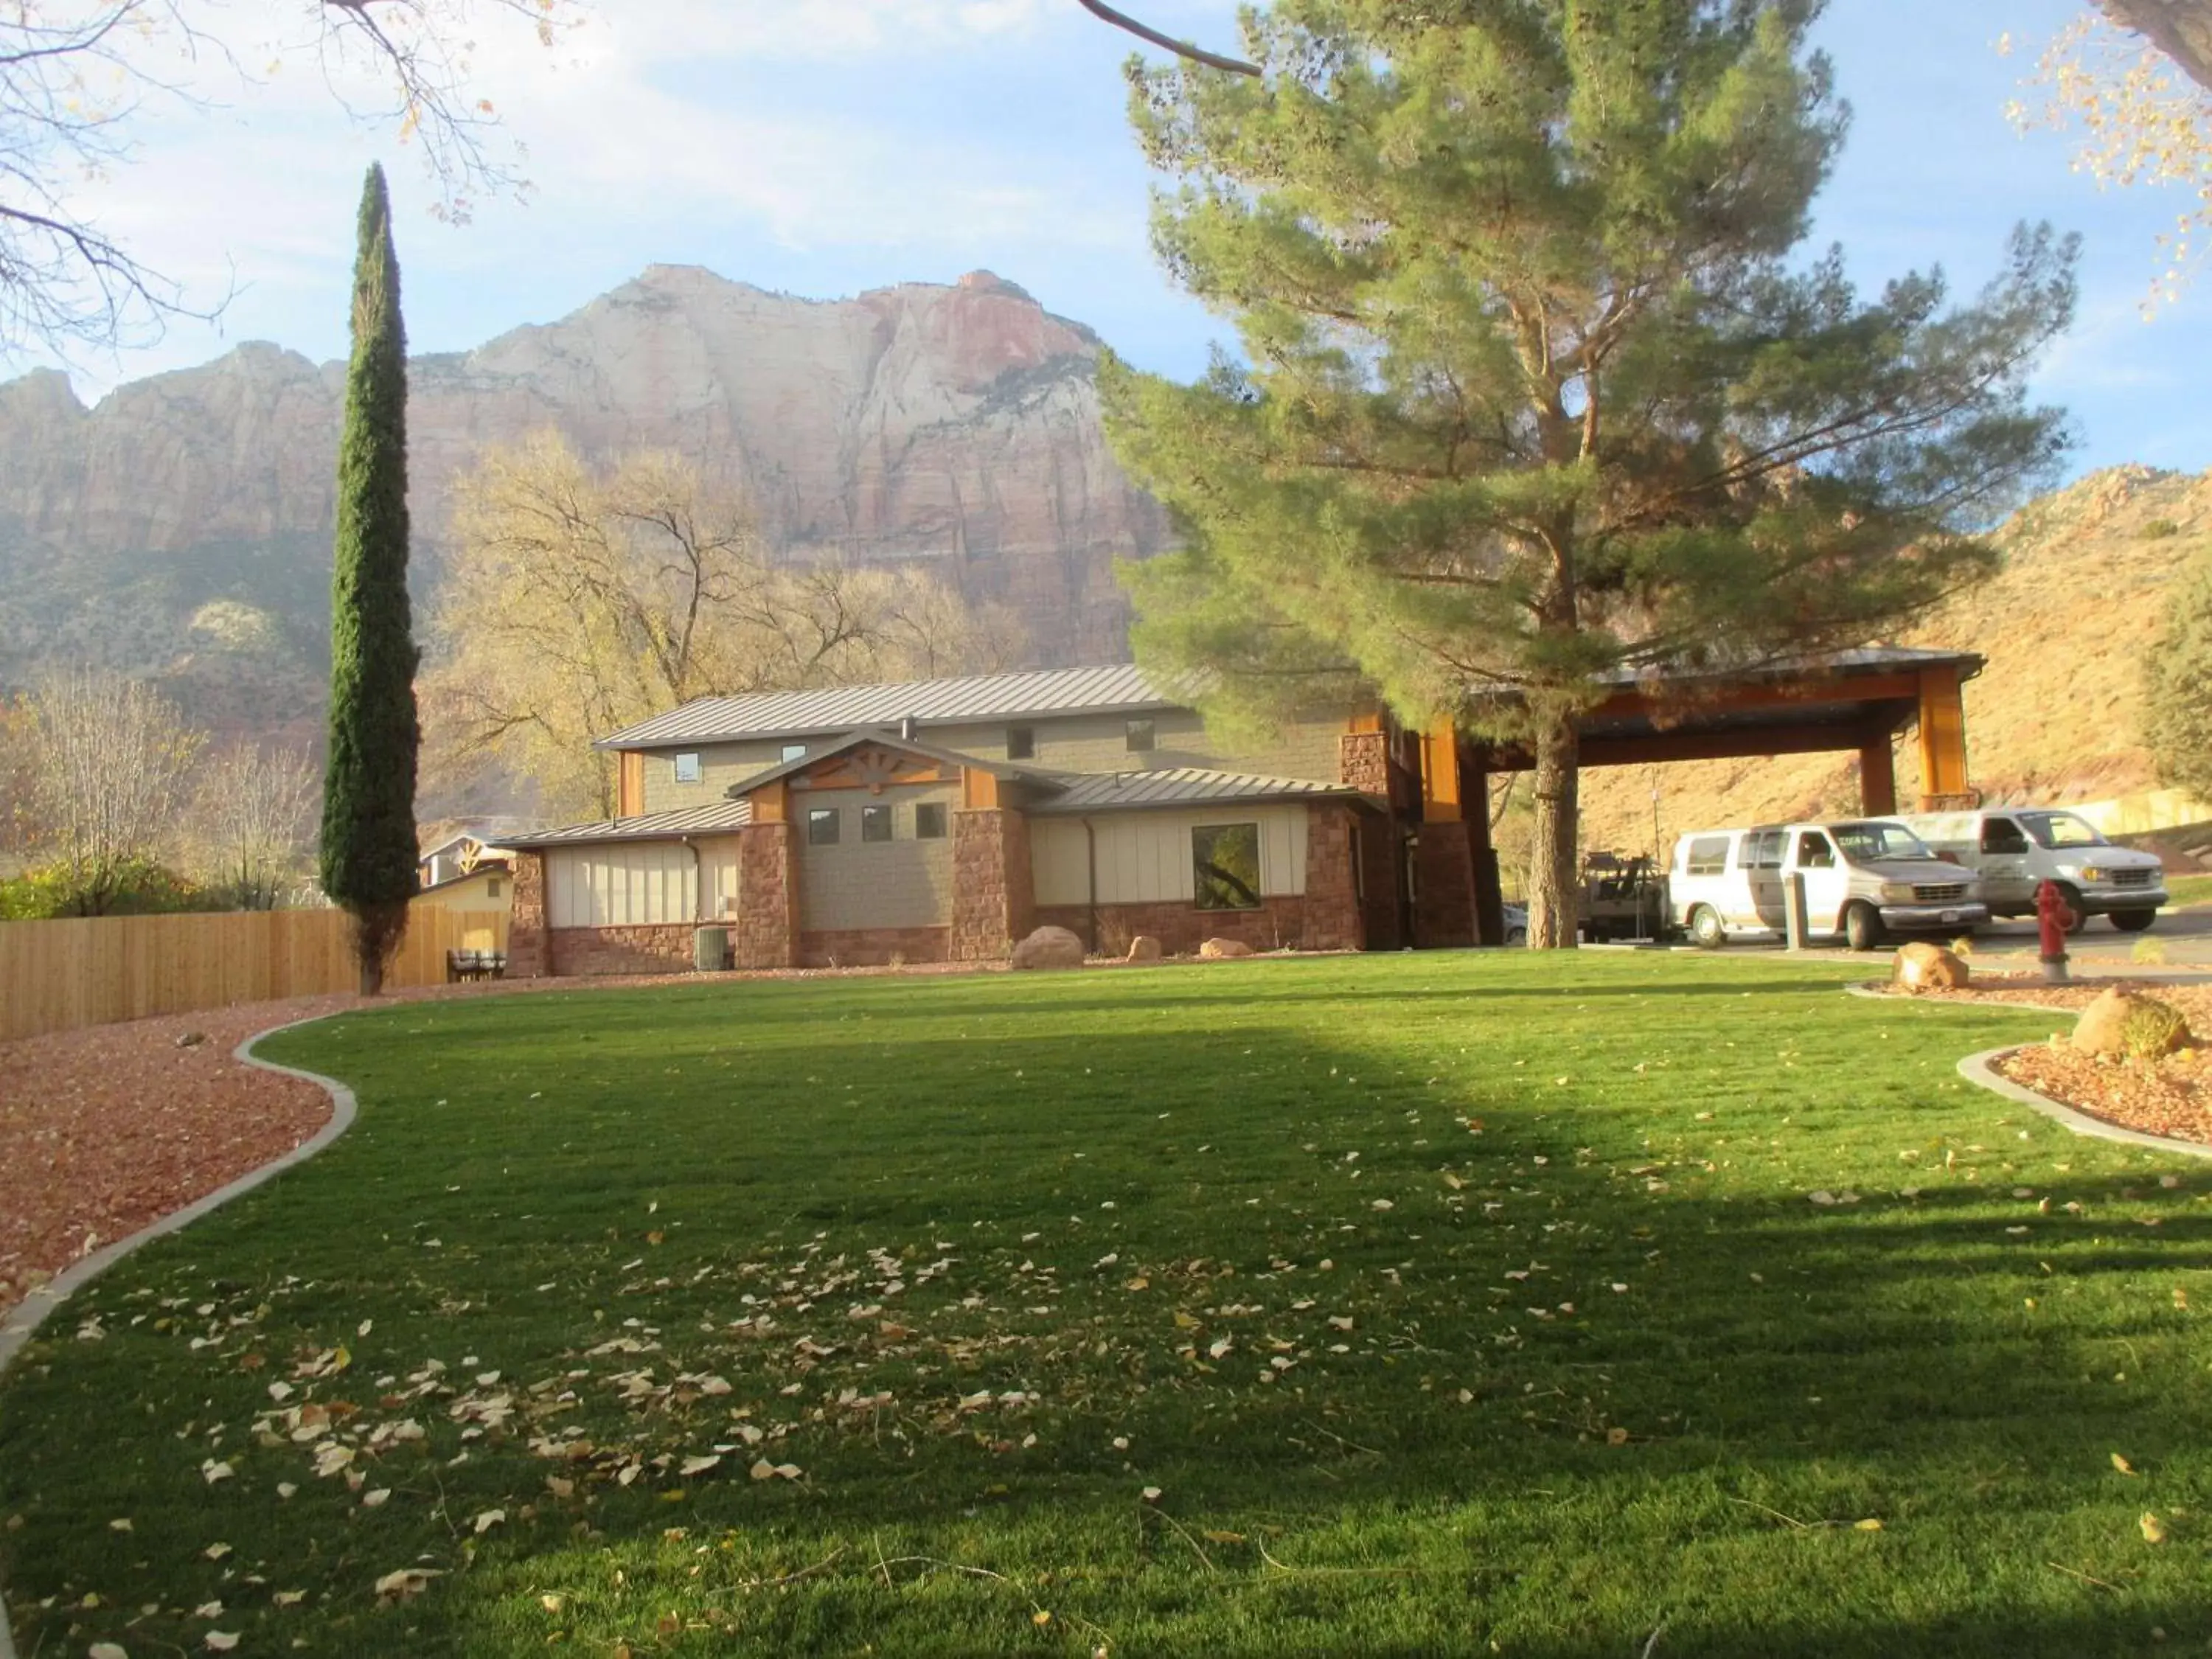 Property Building in Best Western Plus Zion Canyon Inn & Suites